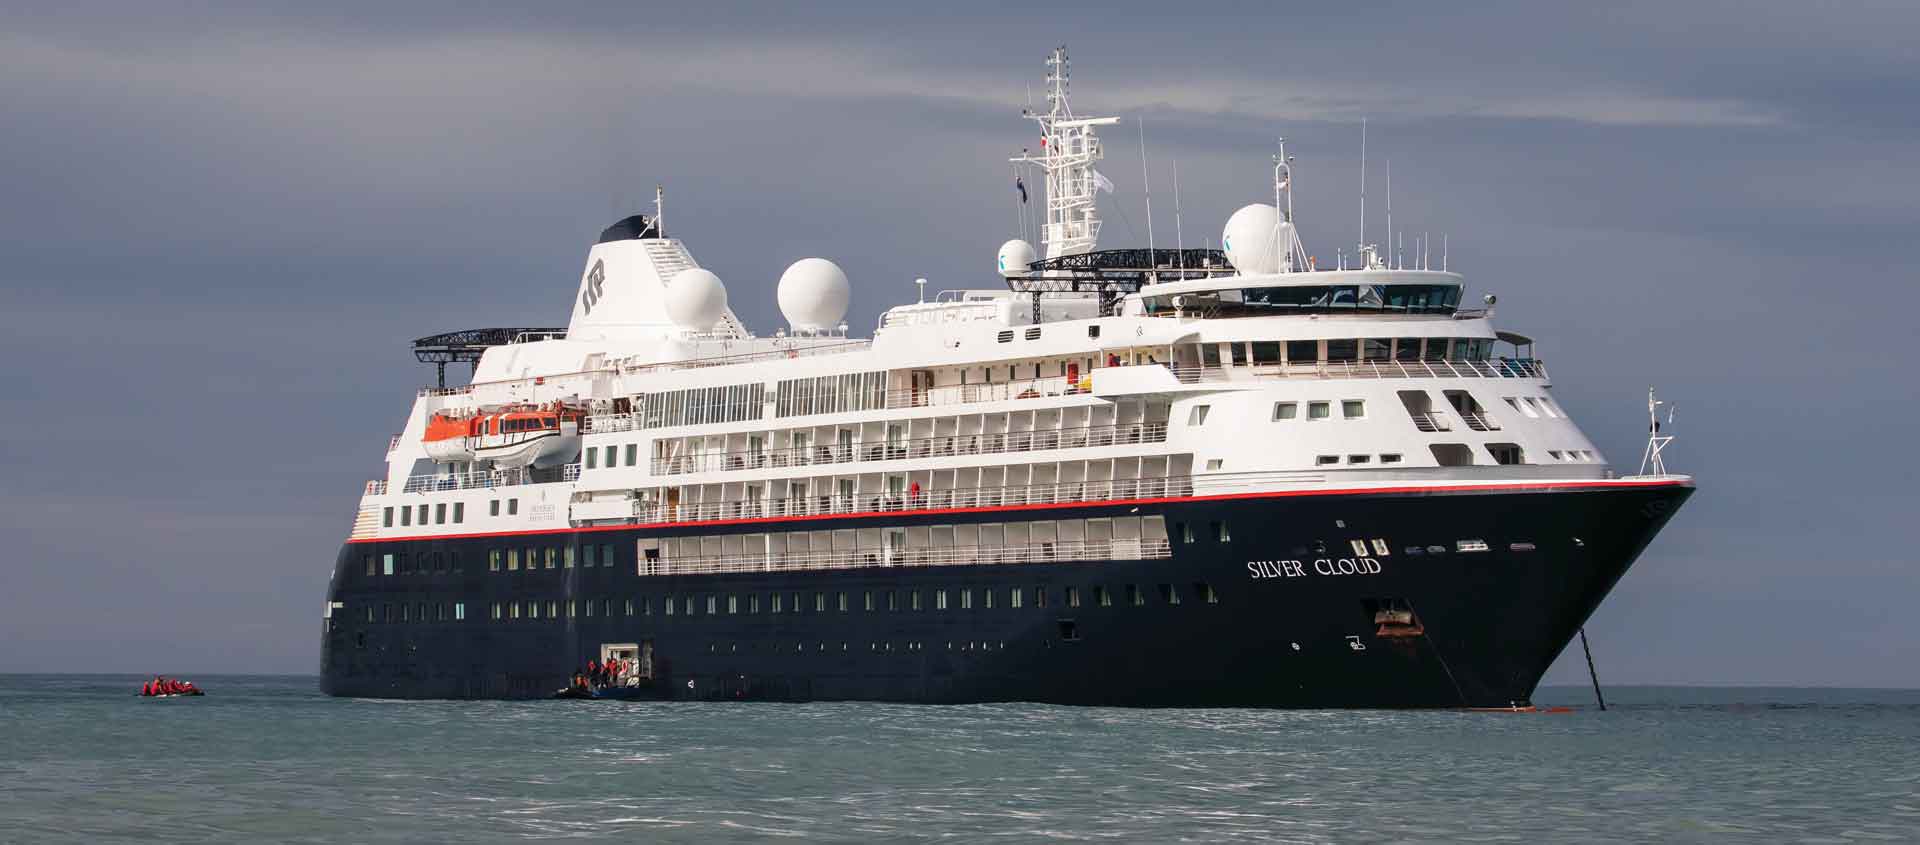 Baffin Island and Greenland image of luxury expedition vessel Silver Cloud